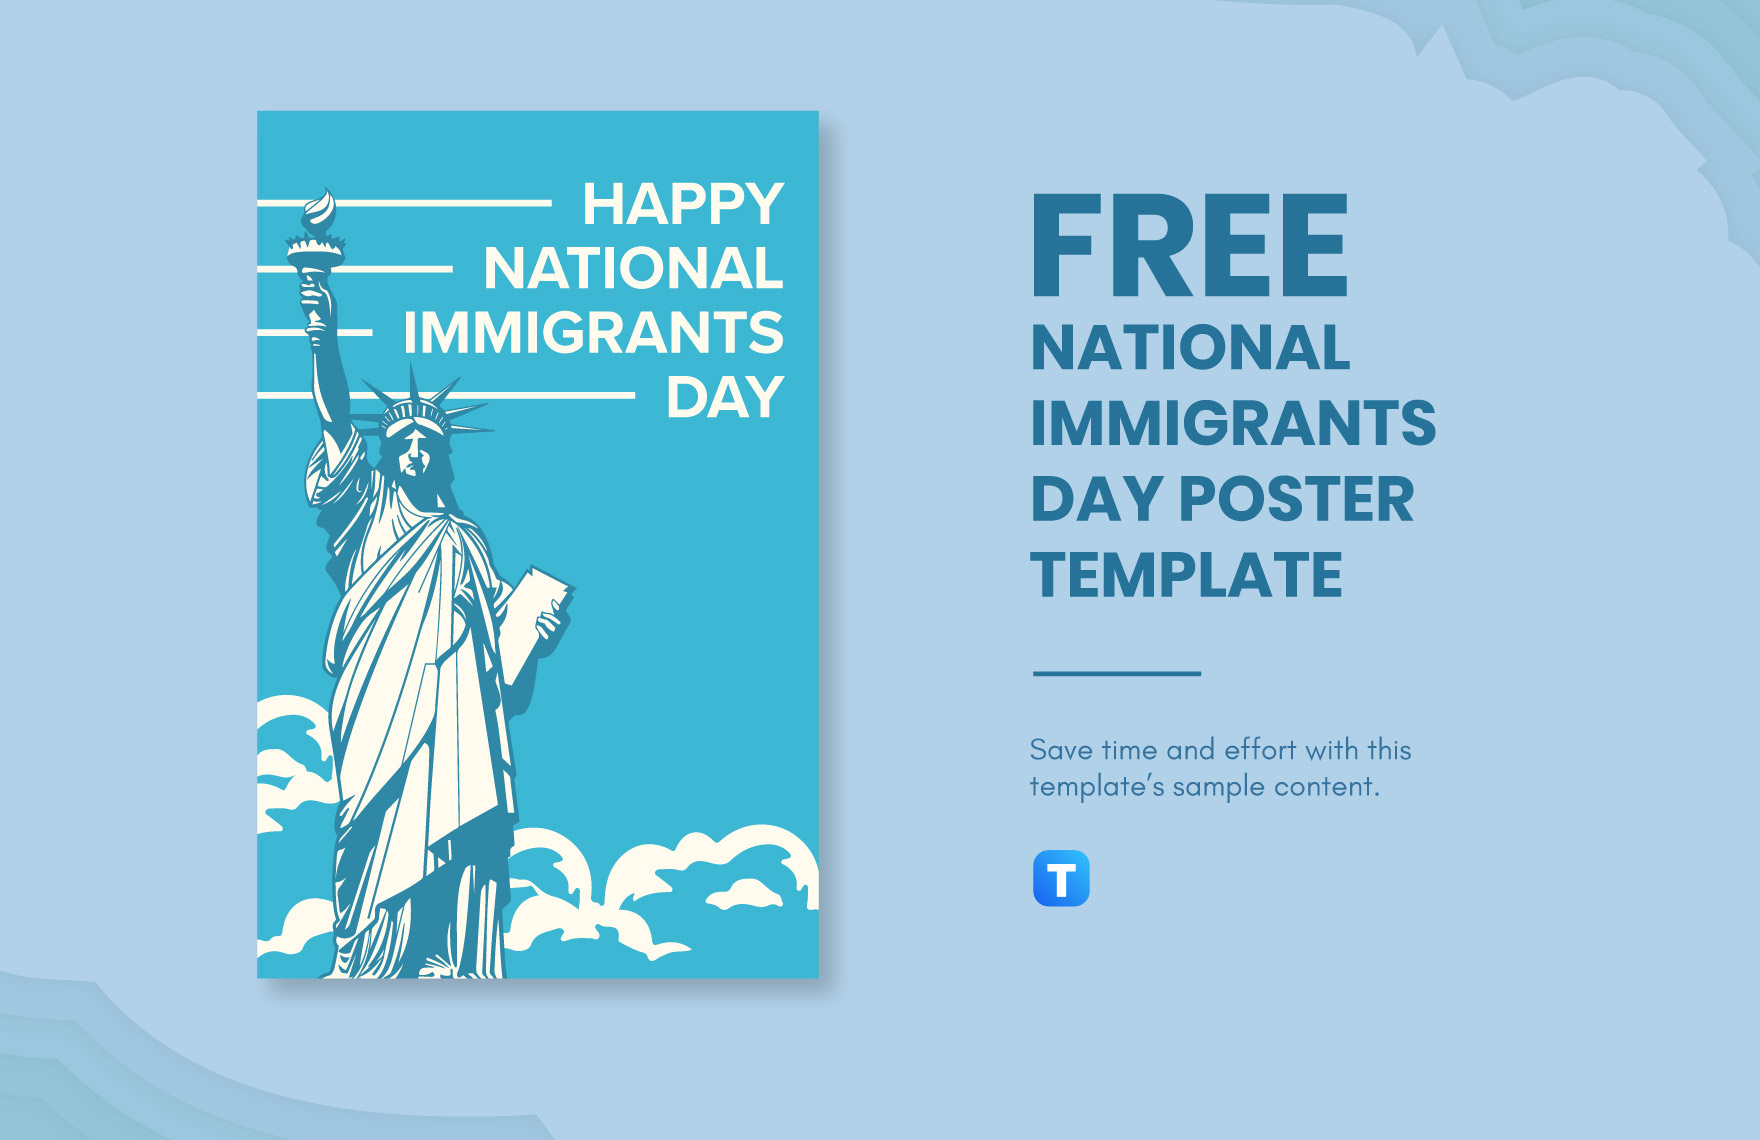 National Immigrants Day Poster Template